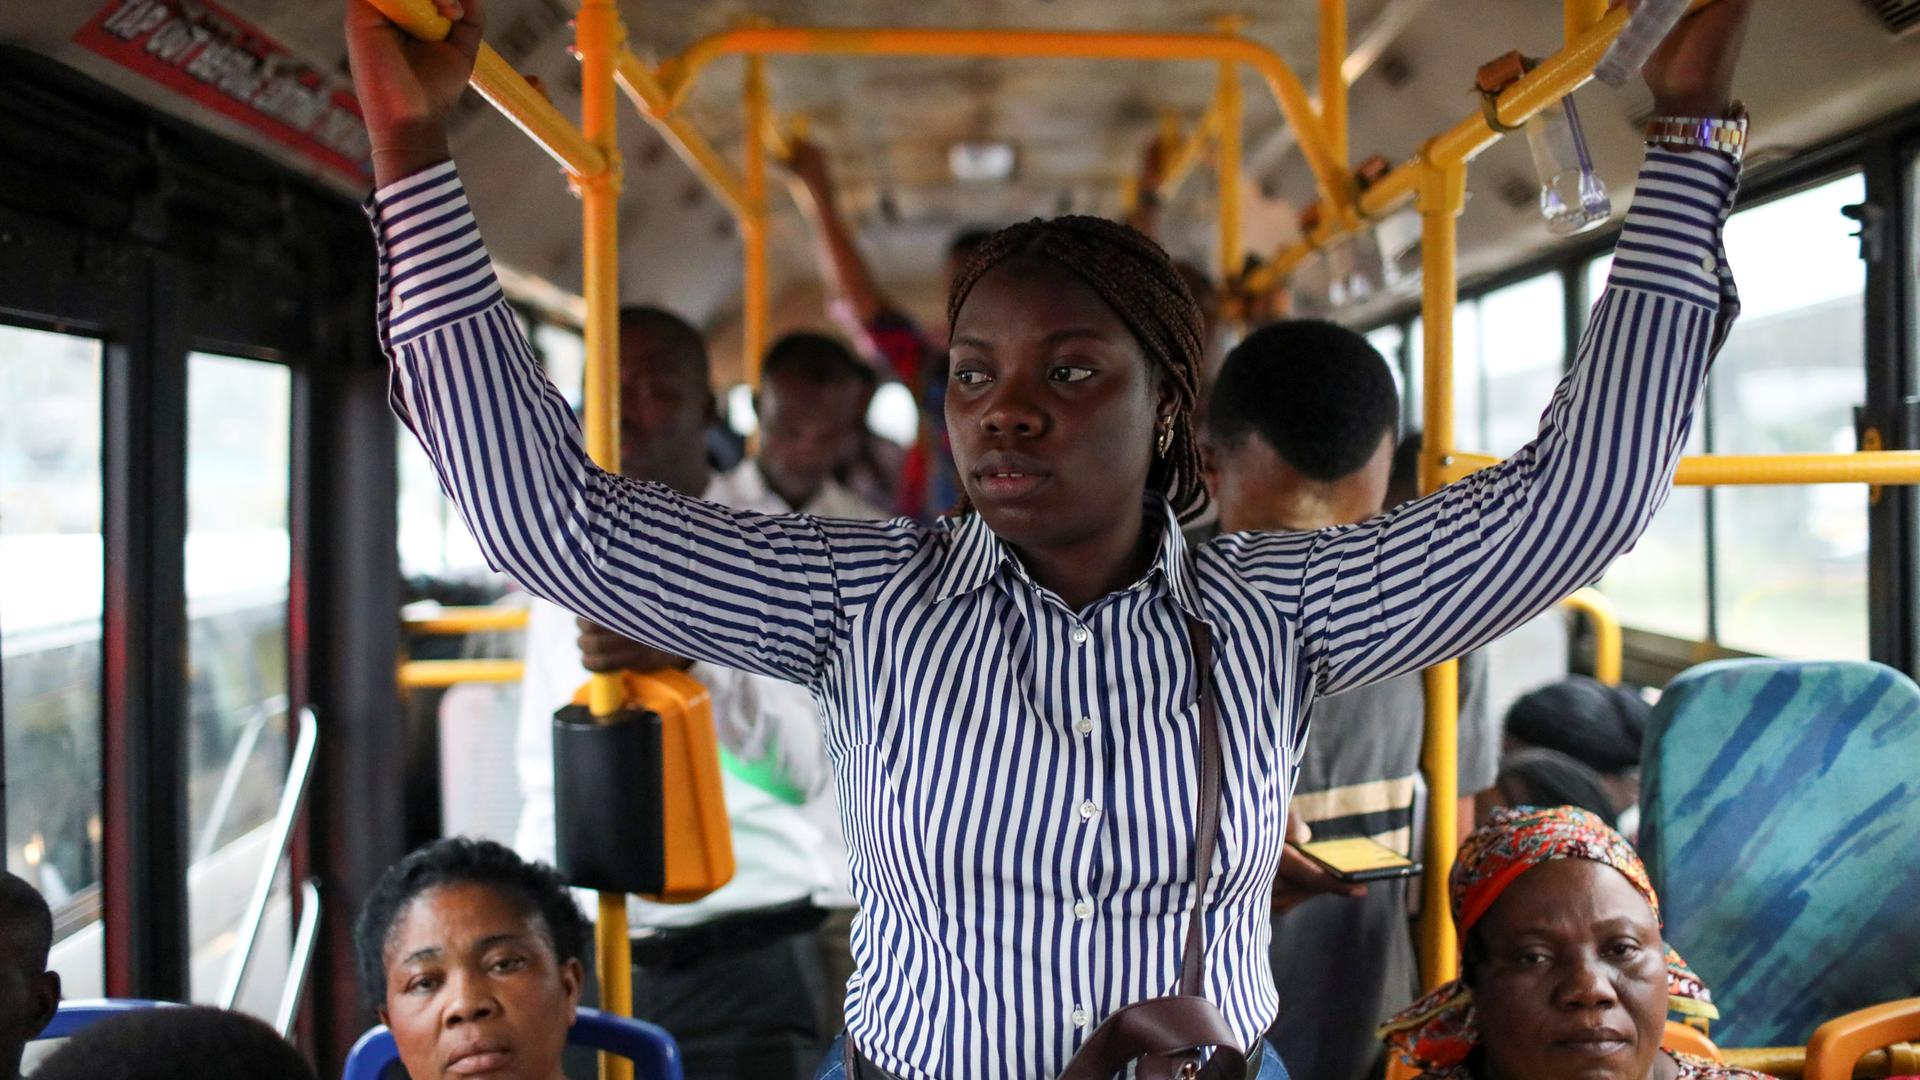 A young woman is shown standing in the middle aisle of a bus holding on to yellow handles.